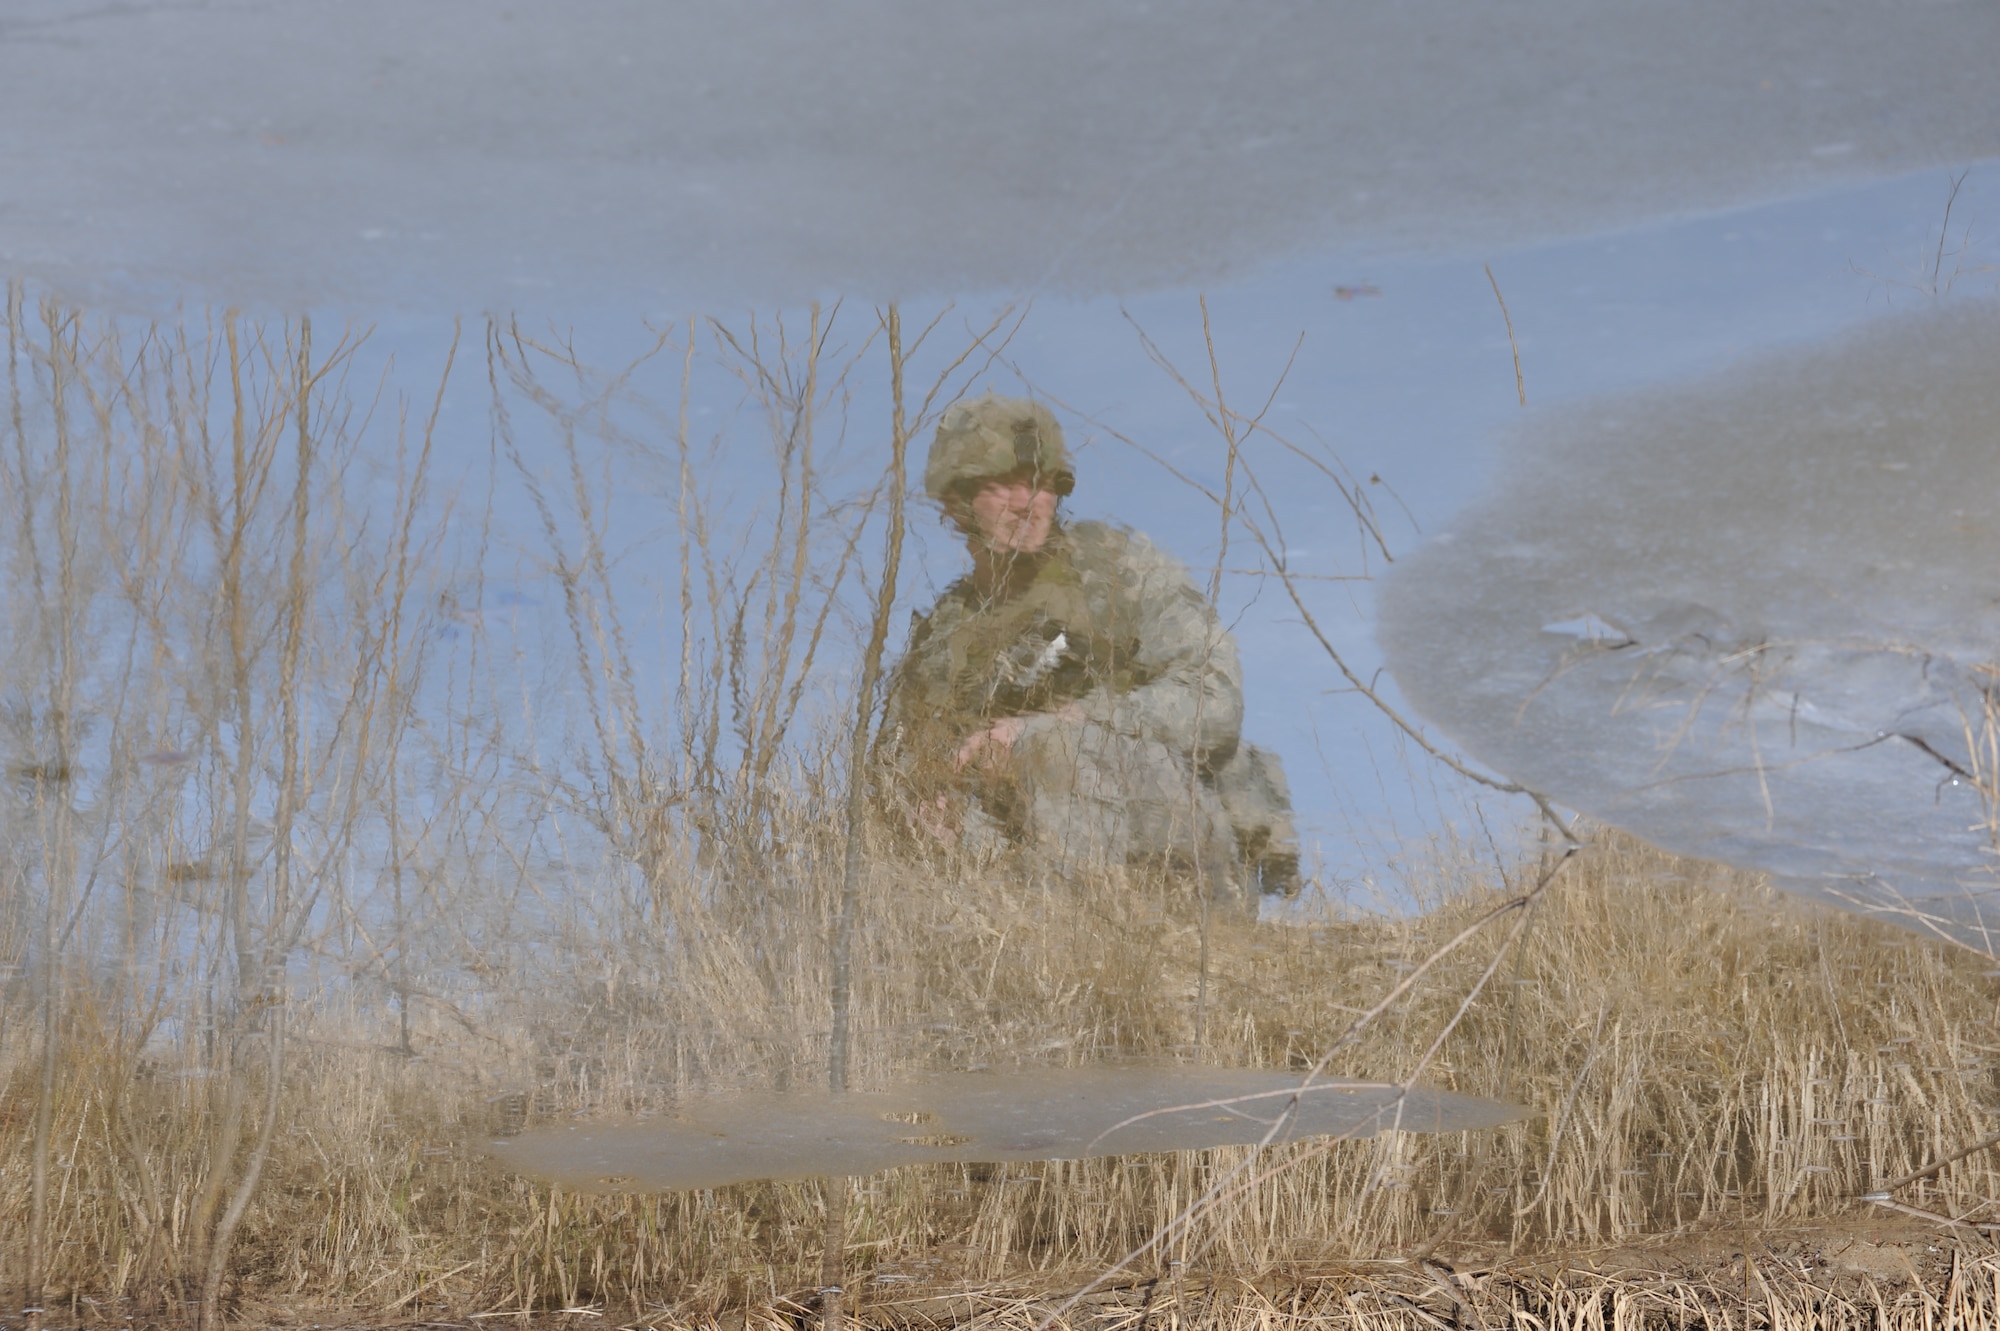 WHITEMAN AIR FORCE BASE, Mo. - Senior Airman Joshua Lancaster, 509th Security Forces Squadron, awaits instruction near a small pool of water during the Blue Coach training initiative  Feb. 6. (U.S. Air Force photo/Staff Sgt. Charles Larkin)
   